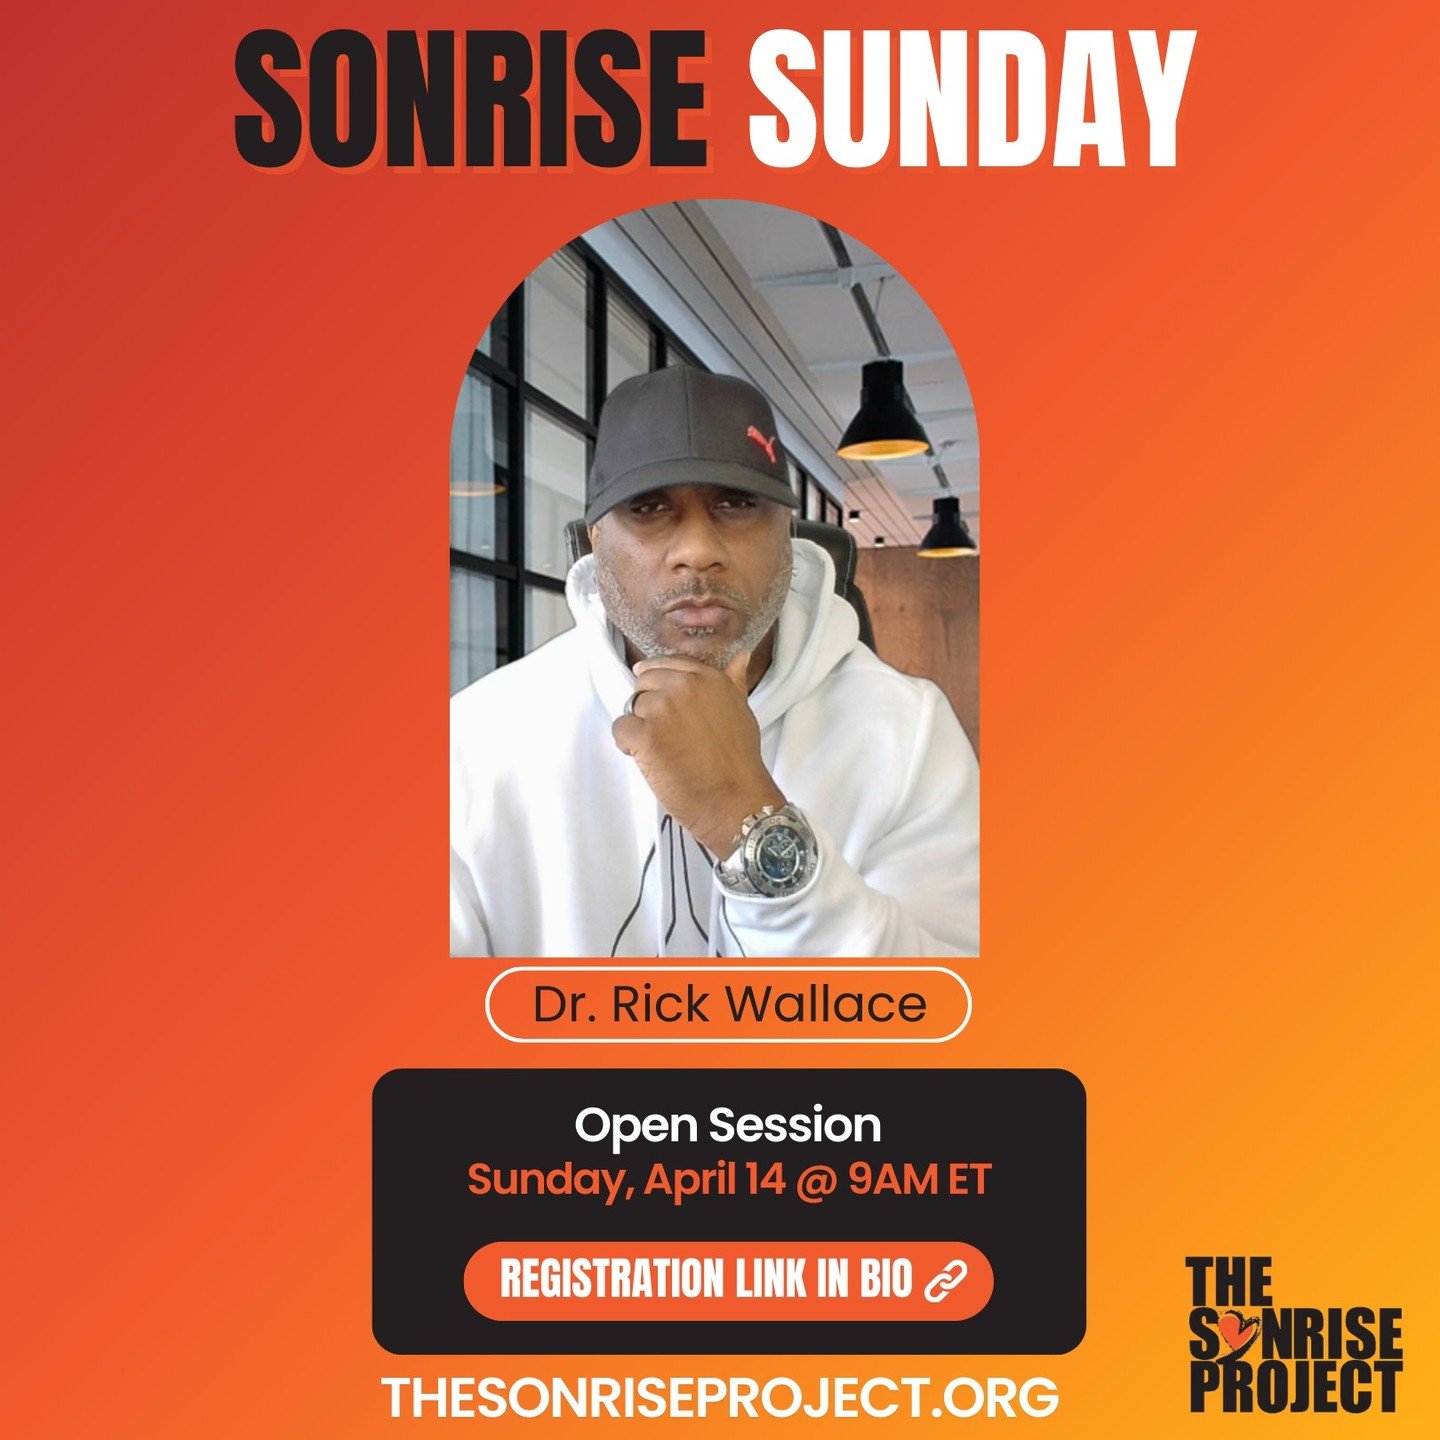 Join us for an Open Session with @rickwallace21 this Sonrise Sunday at 9 AM ET where you are invited to share whatever's on your mind and in your heart. Whether navigating parenting challenges, dealing with mental health issues, or simply seeking a s